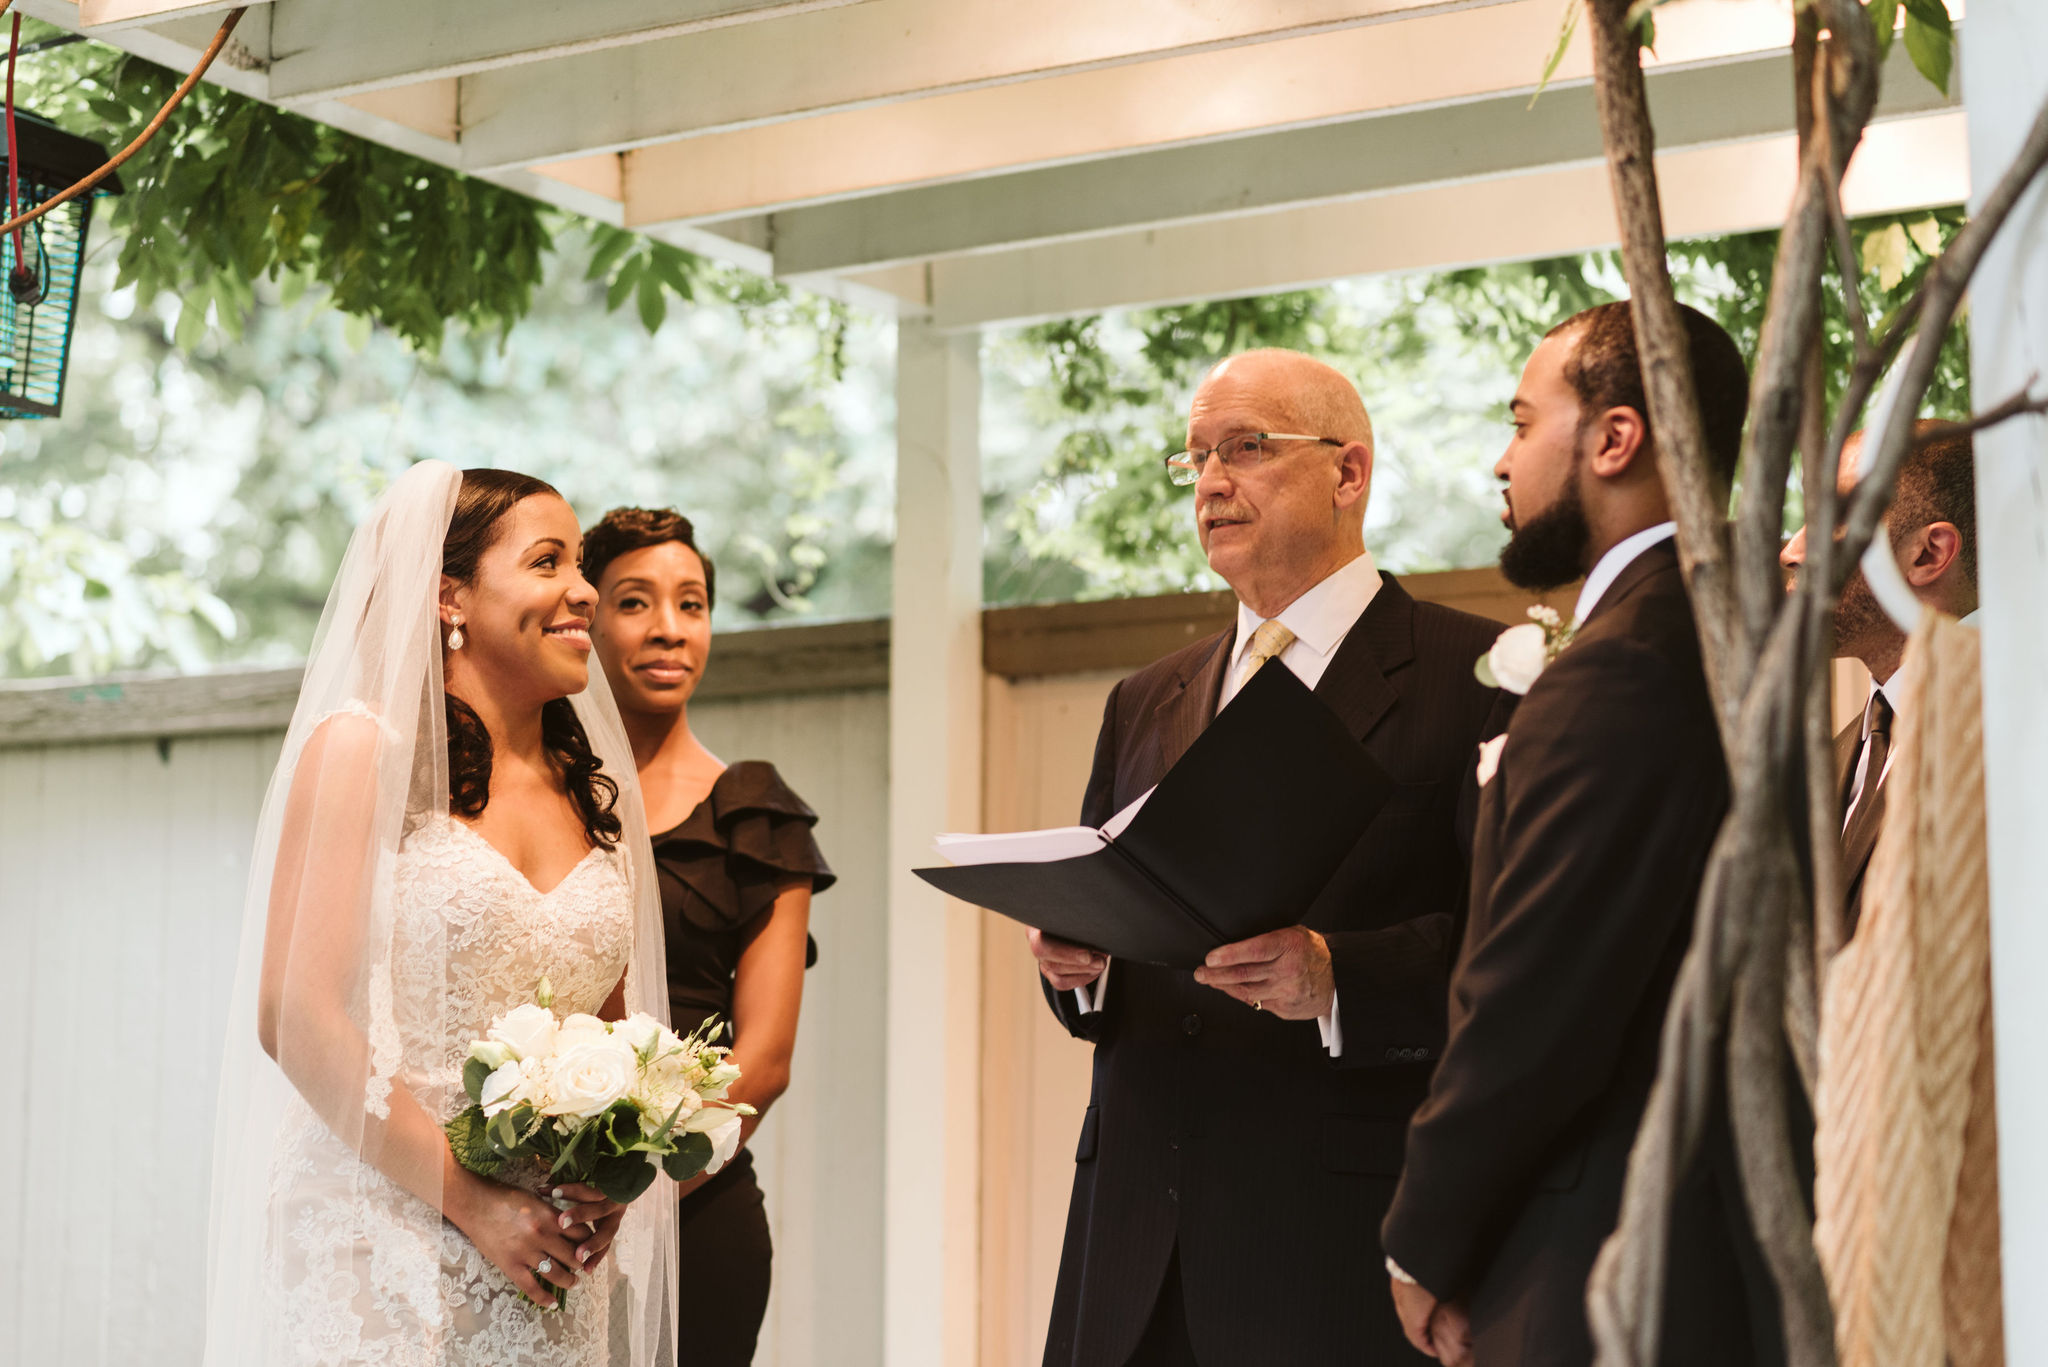  Baltimore, Maryland Wedding Photographer, Mount Vernon, Chase Court, Classic, Outdoor Ceremony, Garden, Romantic, Bride and Groom Standing at Altar with Officiant, White Flowers 